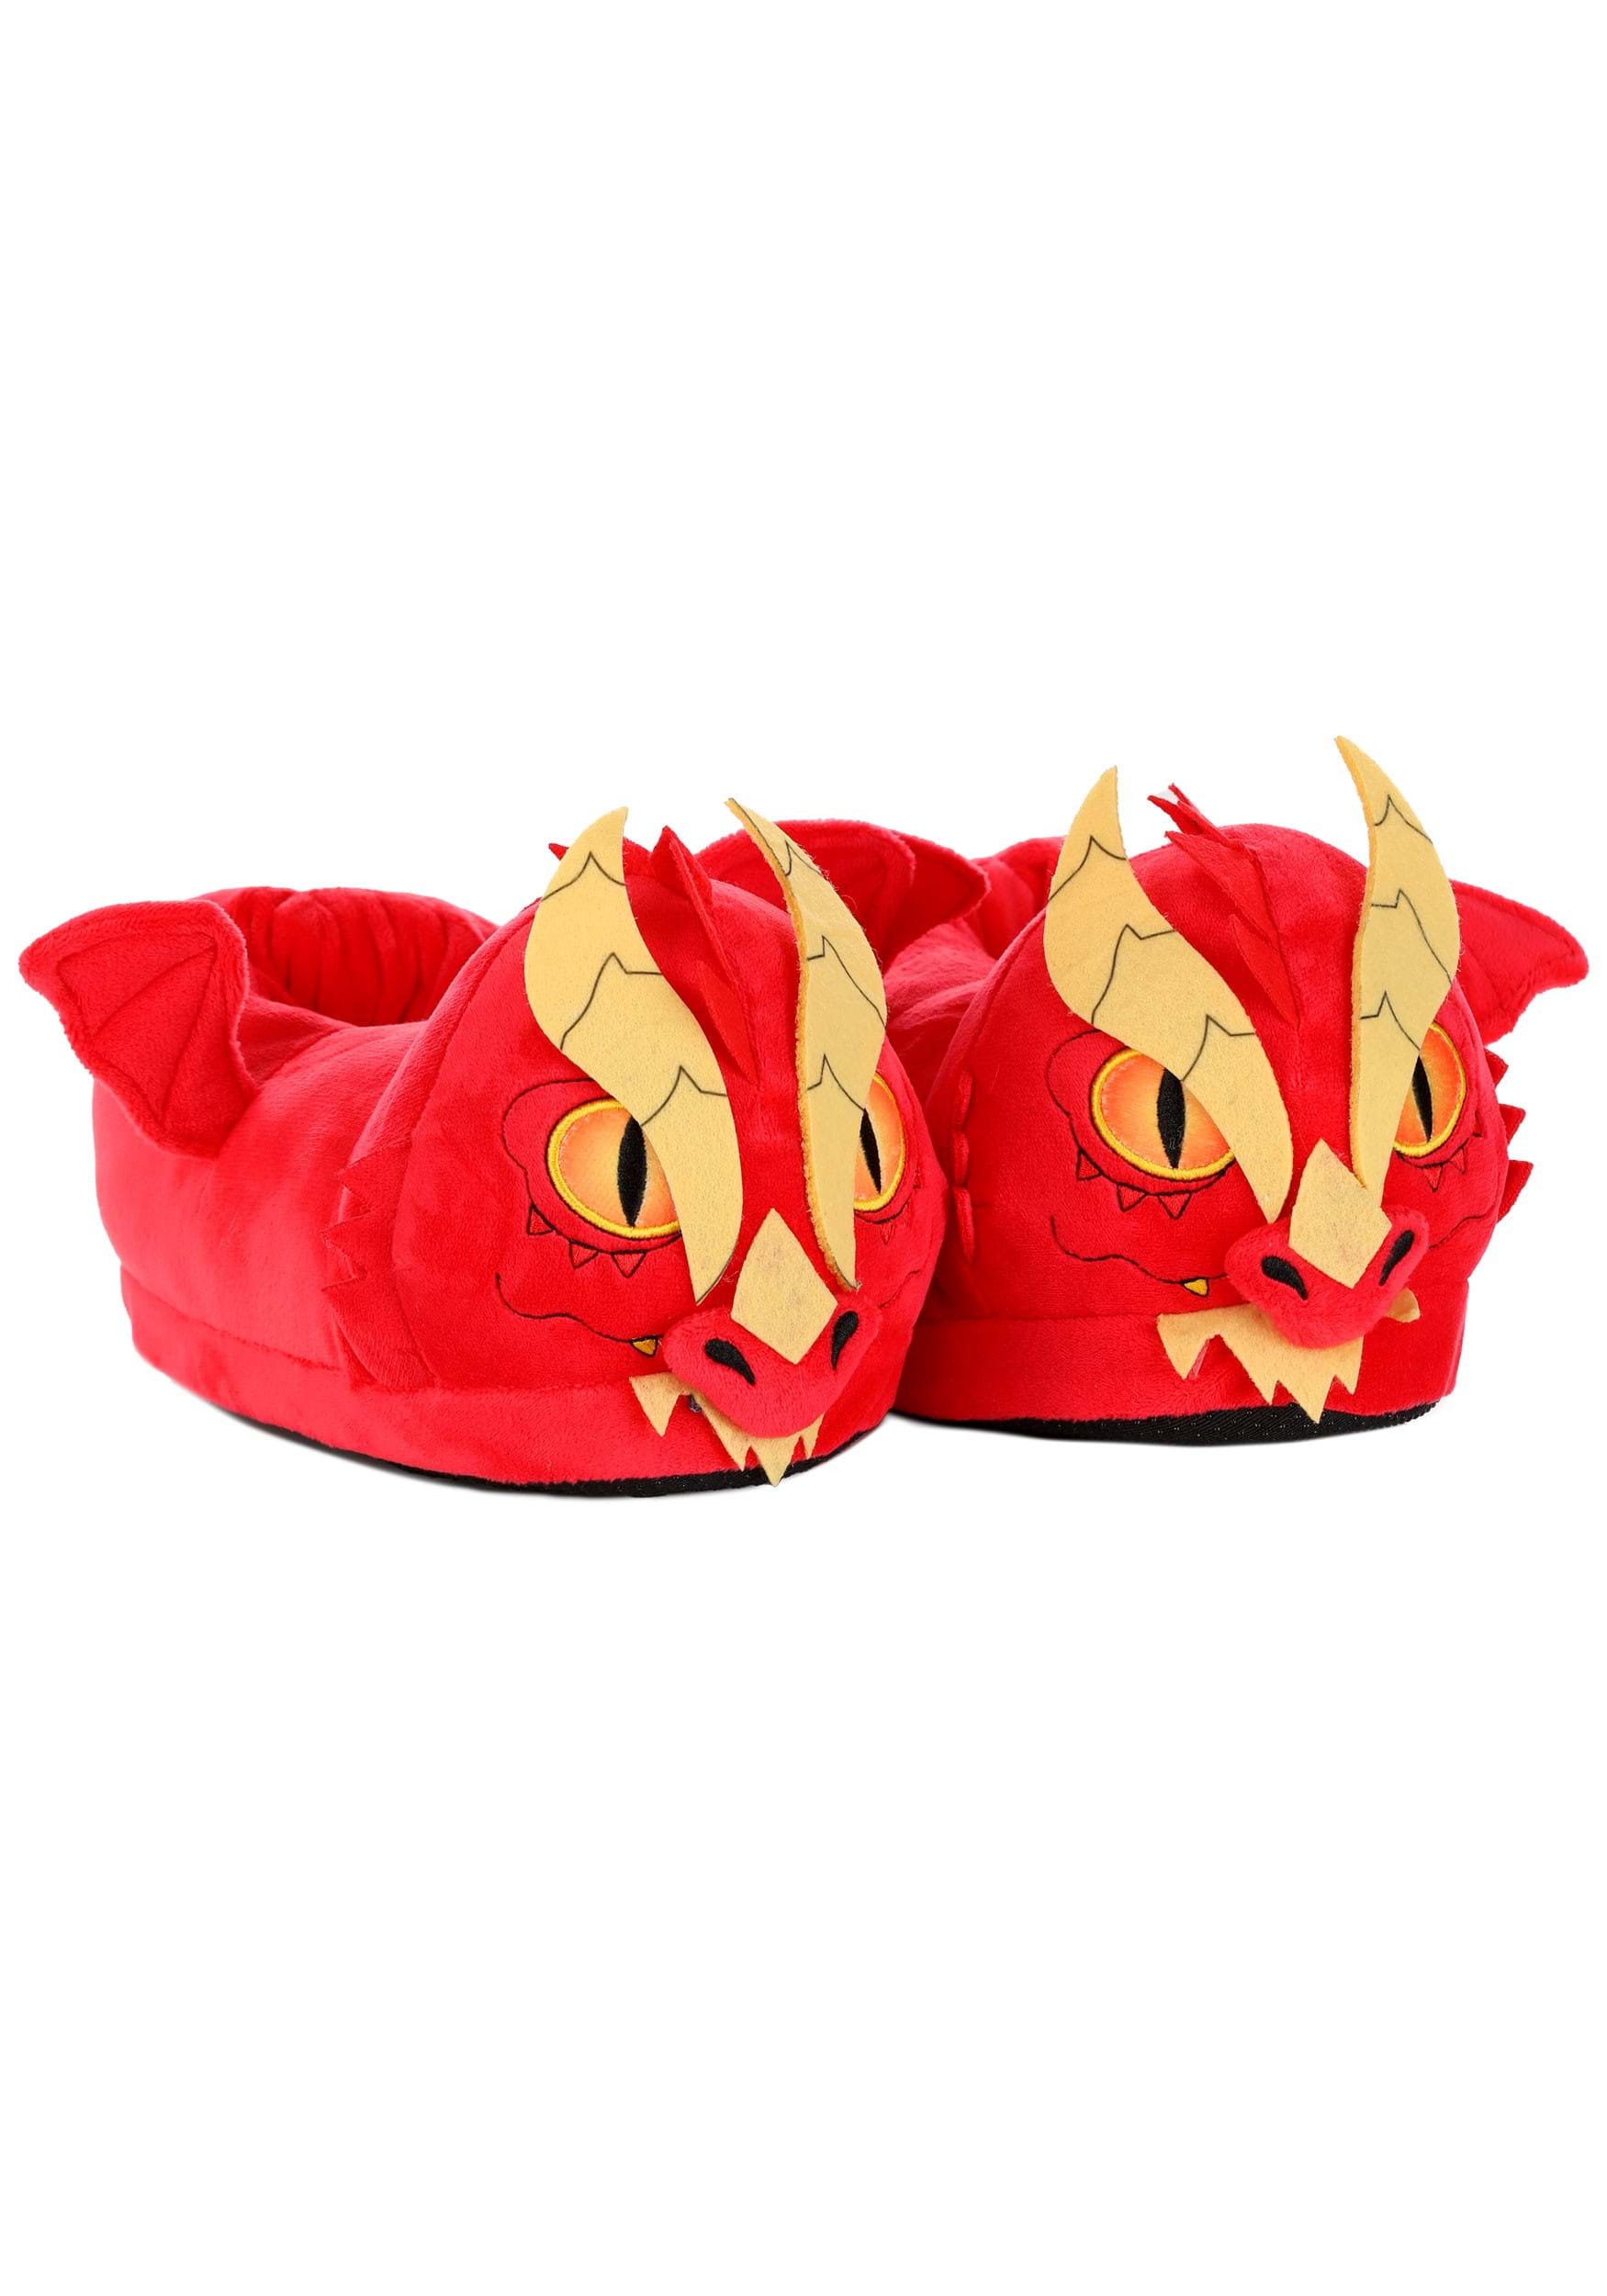 Dungeons & Dragons Dragon Slippers | Nerdy Slippers